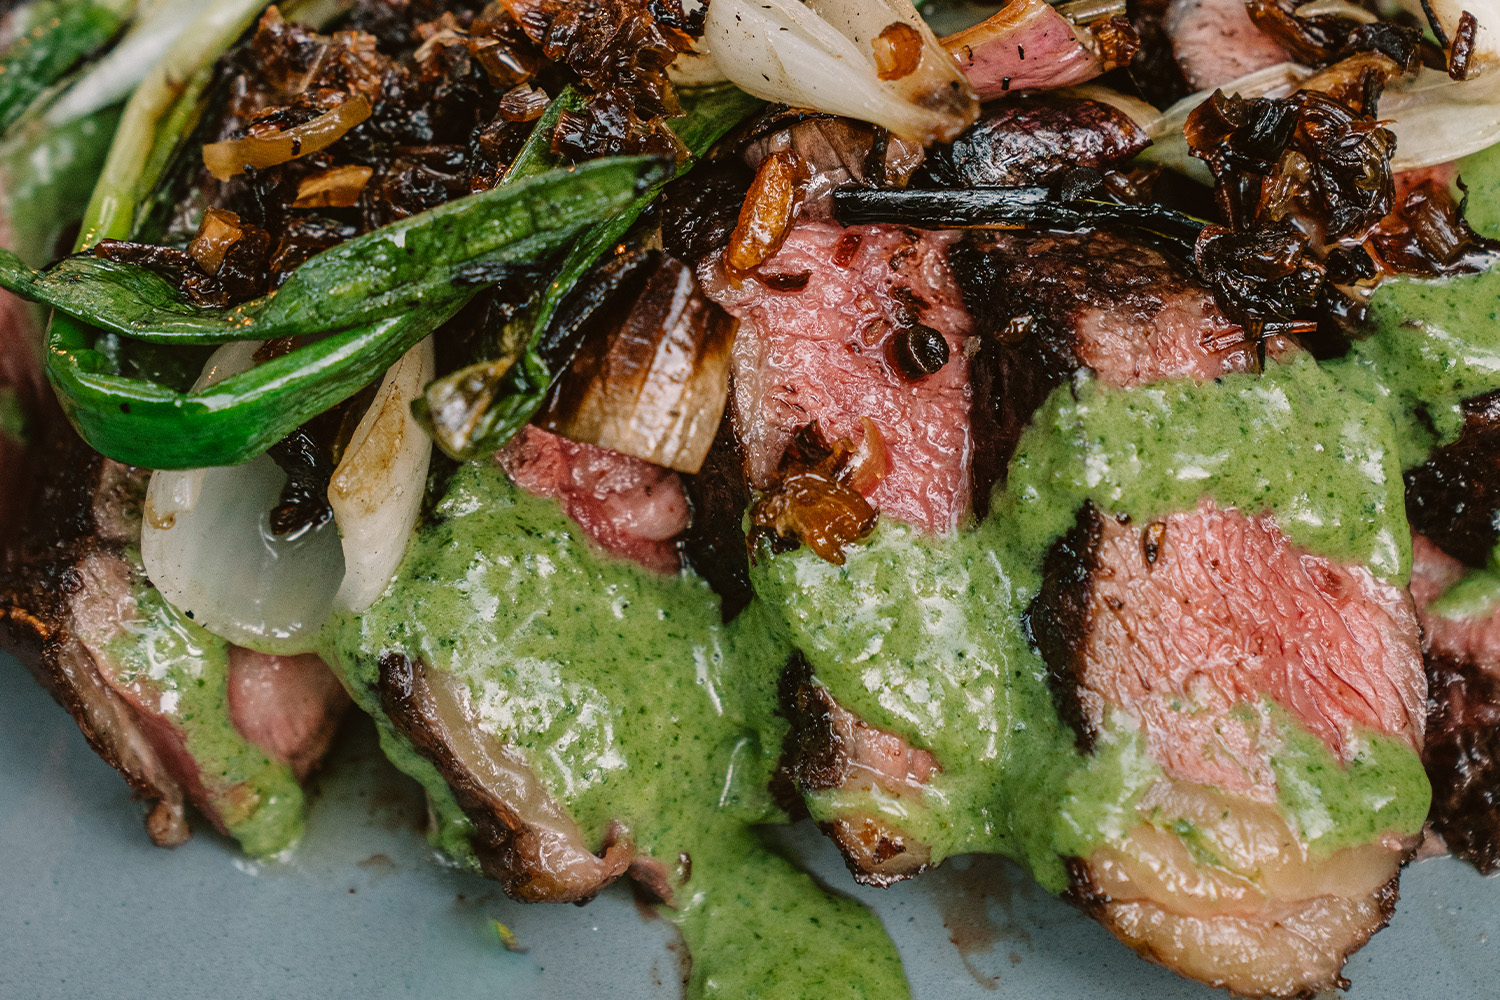 Wagyu First Light Rib Steak with Creamed Nettles and Roasted Spring Onions